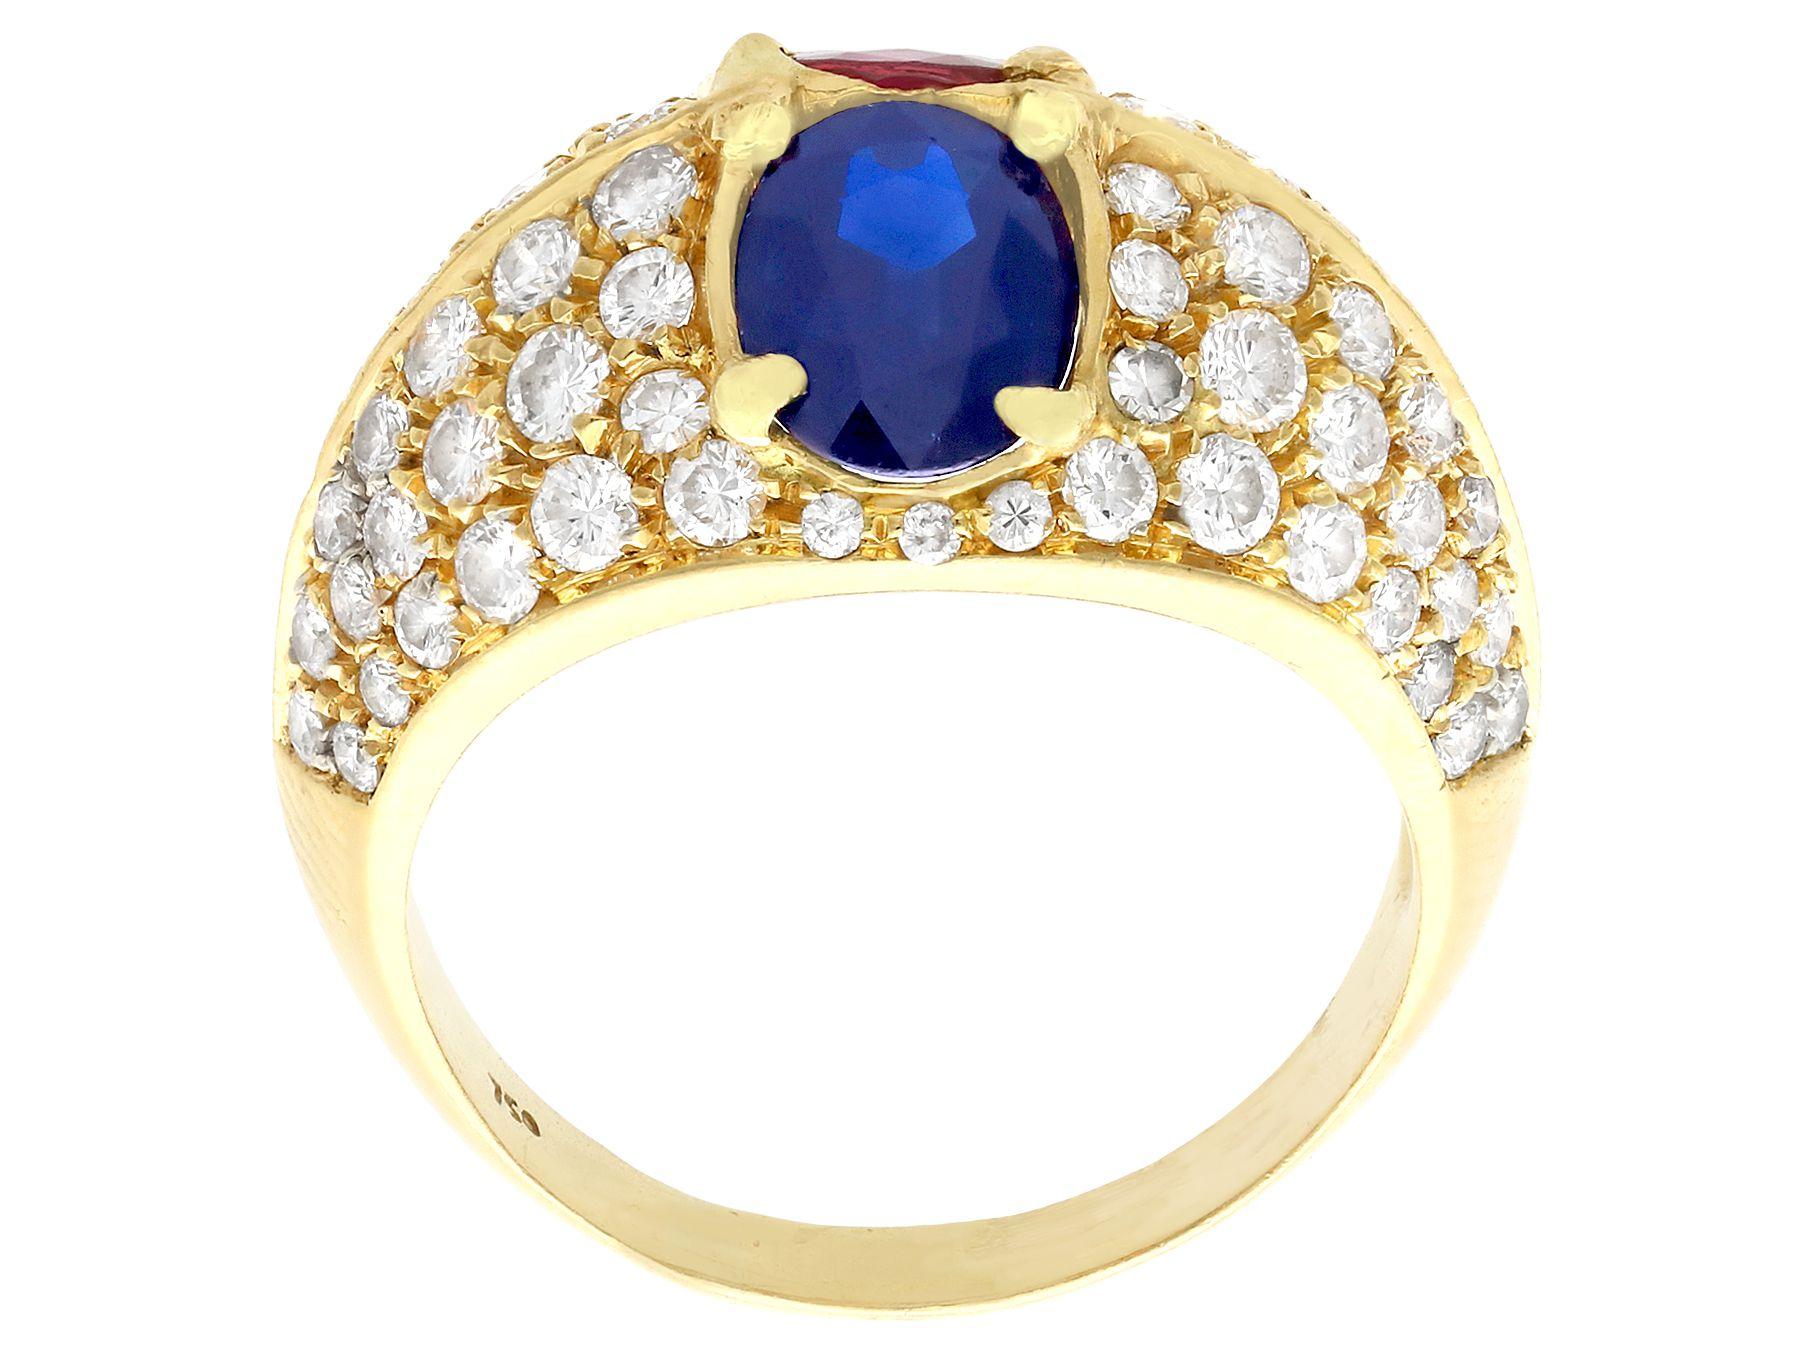 1.35 Carat Ruby and 1.28 Carat Sapphire 1.75 Carat Diamond and Yellow Gold Ring In Excellent Condition For Sale In Jesmond, Newcastle Upon Tyne